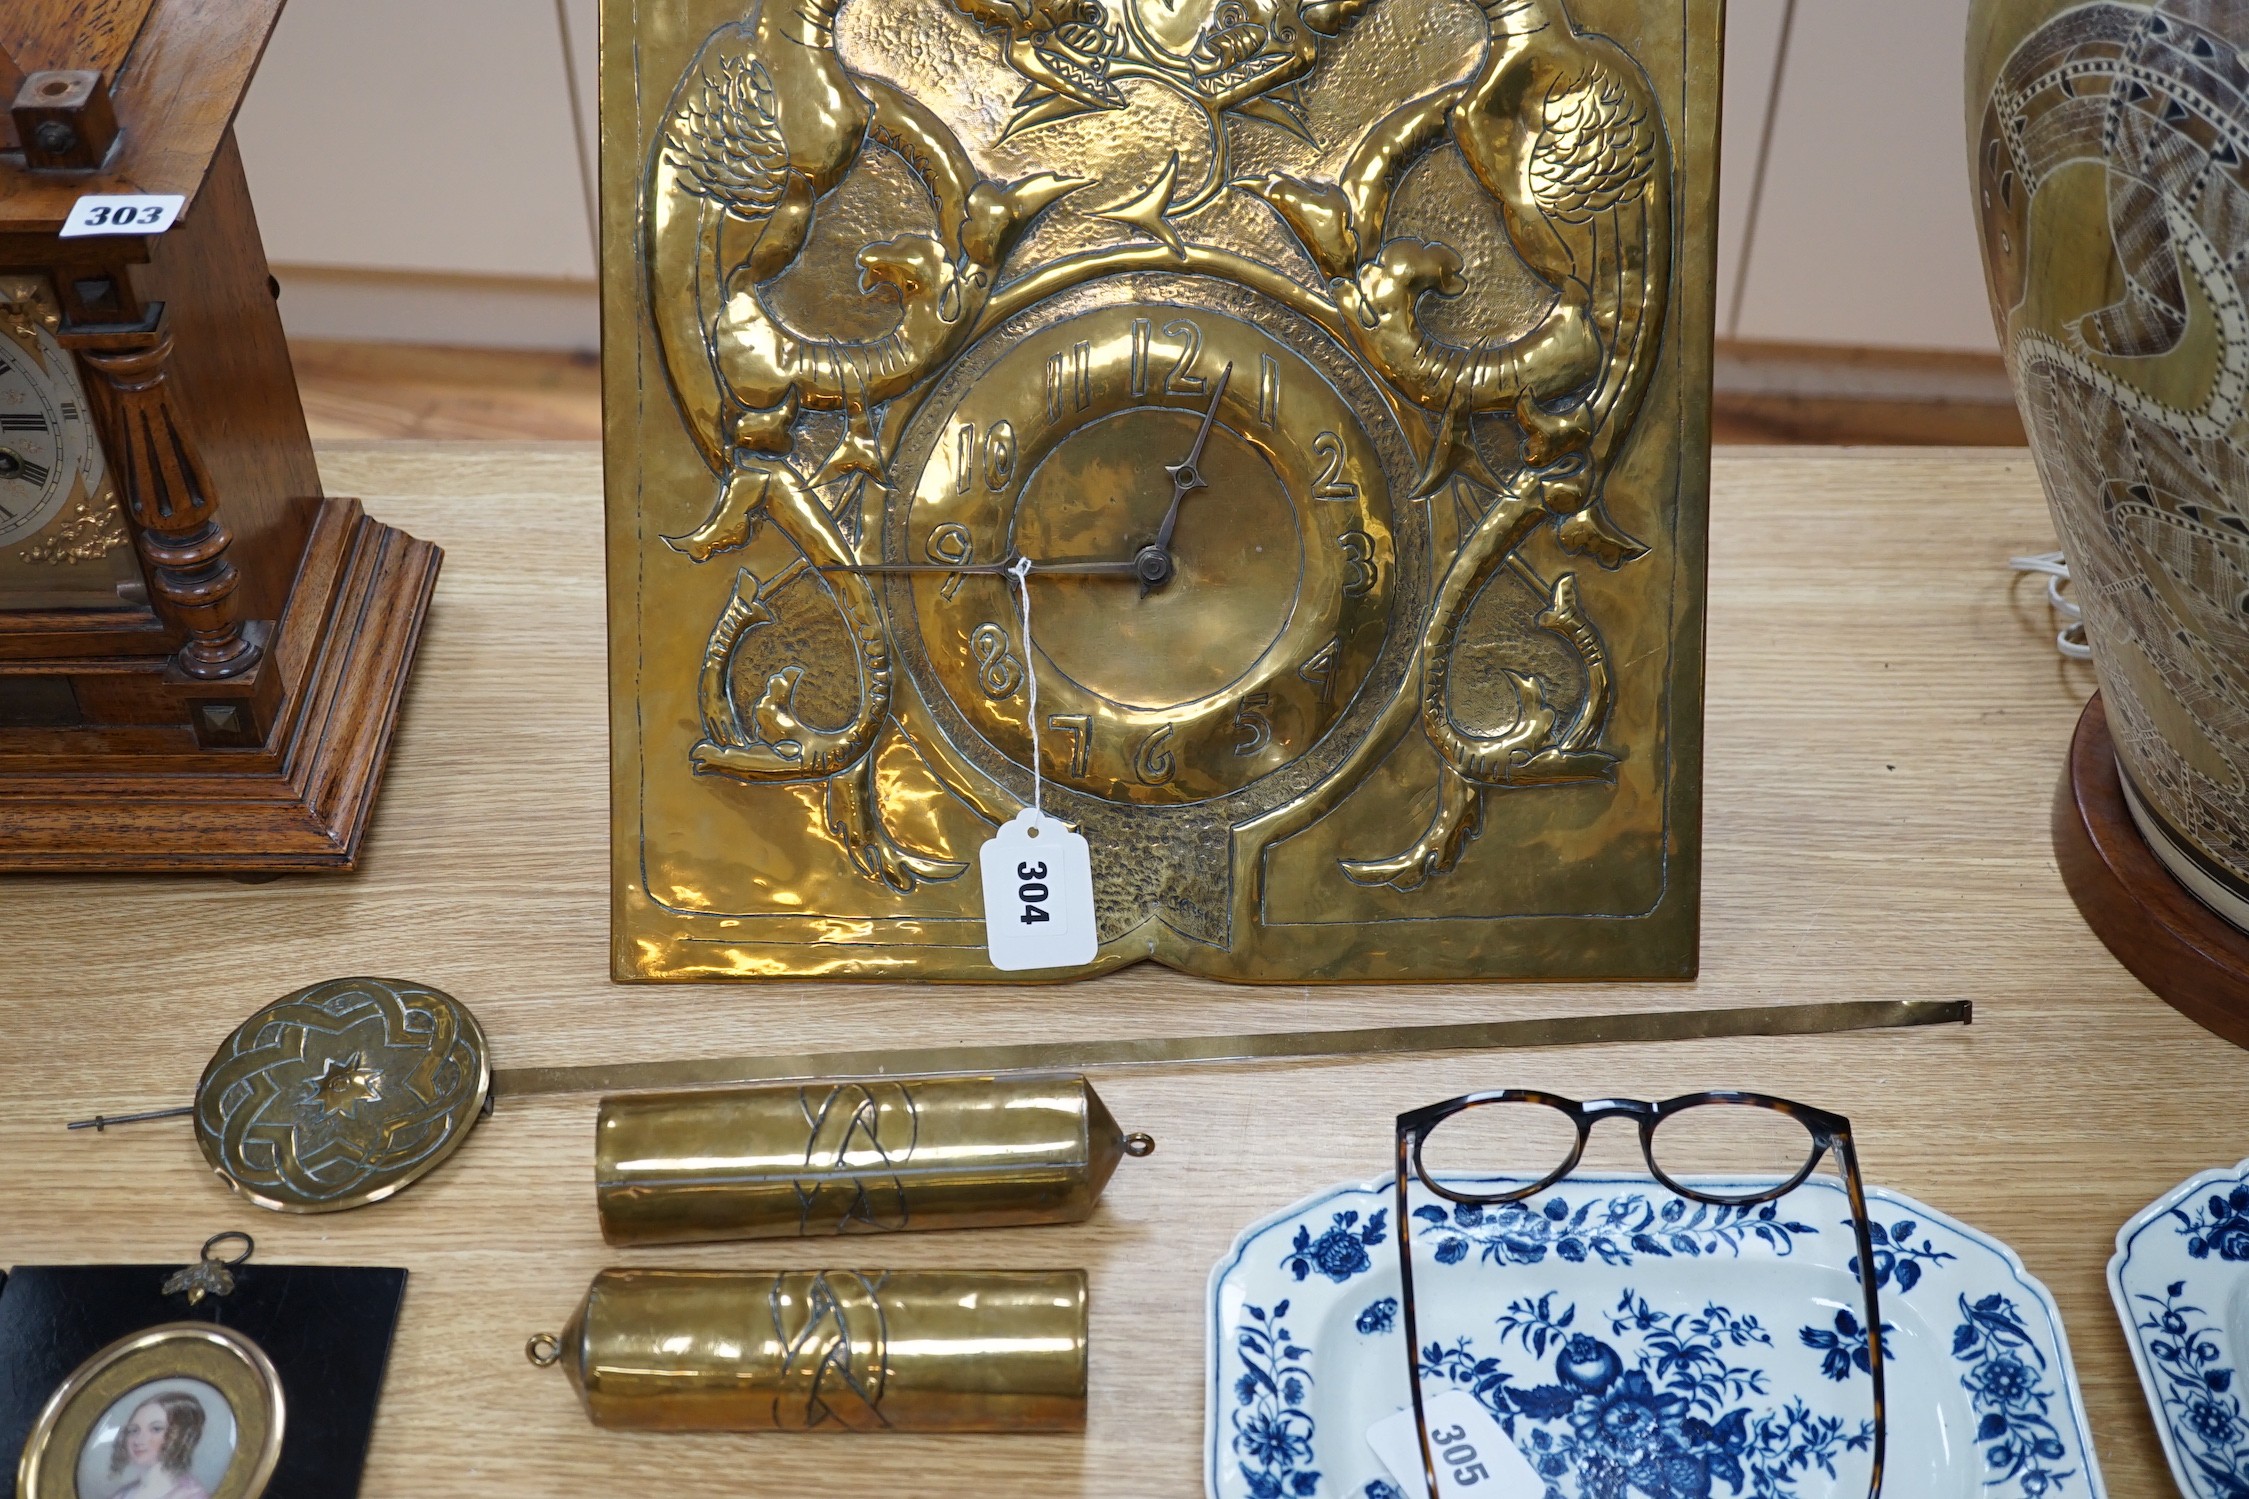 An early 20th Century Arts & Crafts/Art Nouveau brass wall clock in the manner of Margaret Gilmour, Glasgow School with embossed weights and pendulum, dial 37x37cm, Black Forest type movement